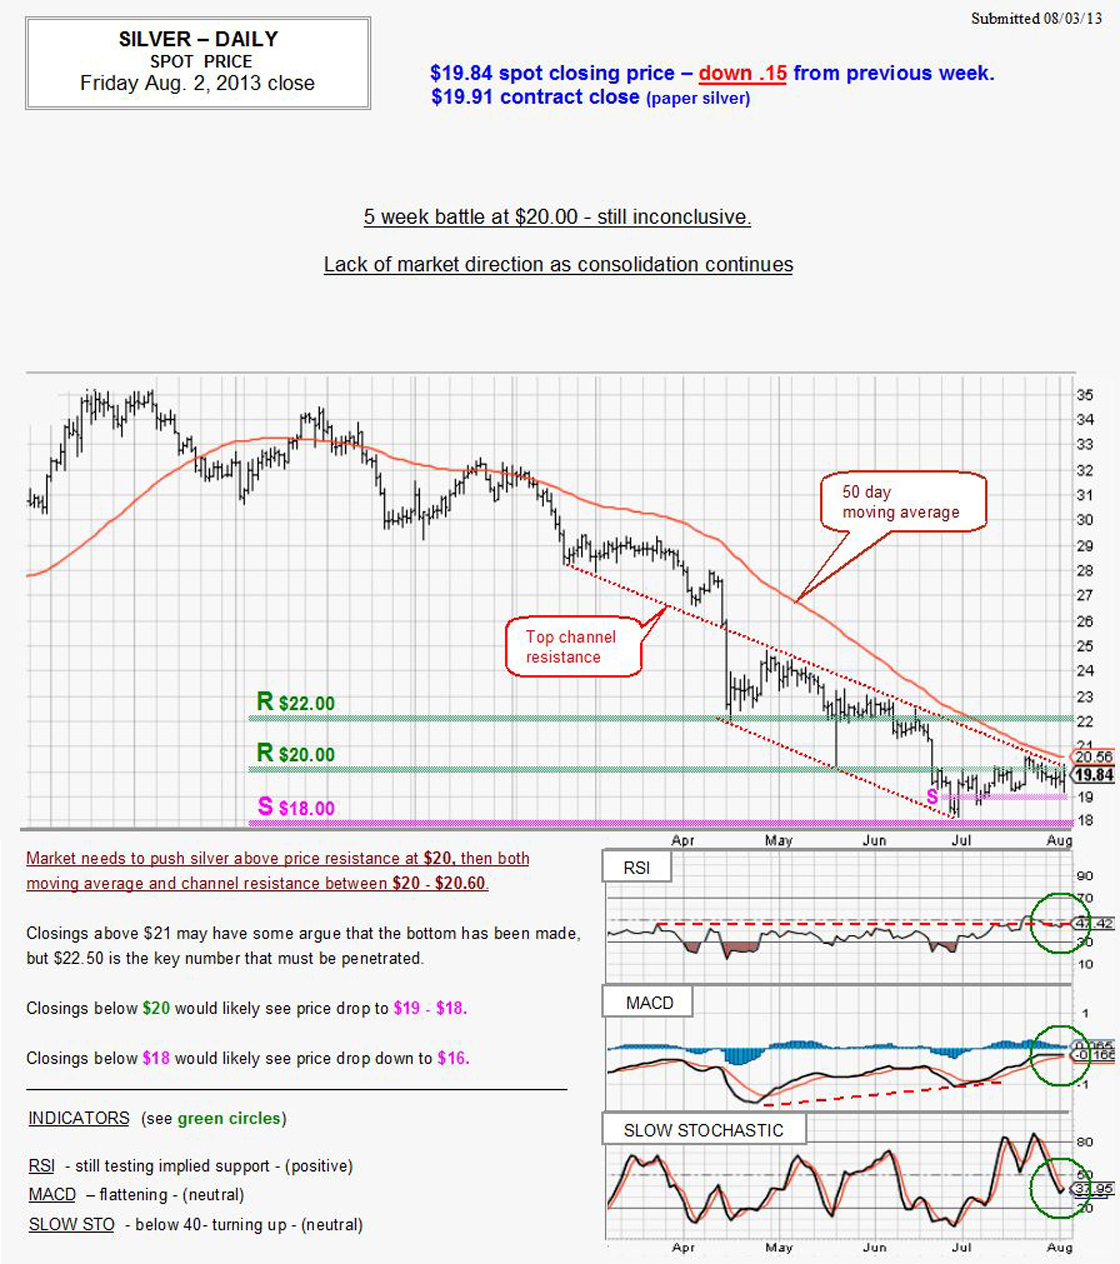 Aug 2, 2013 chart & commentary